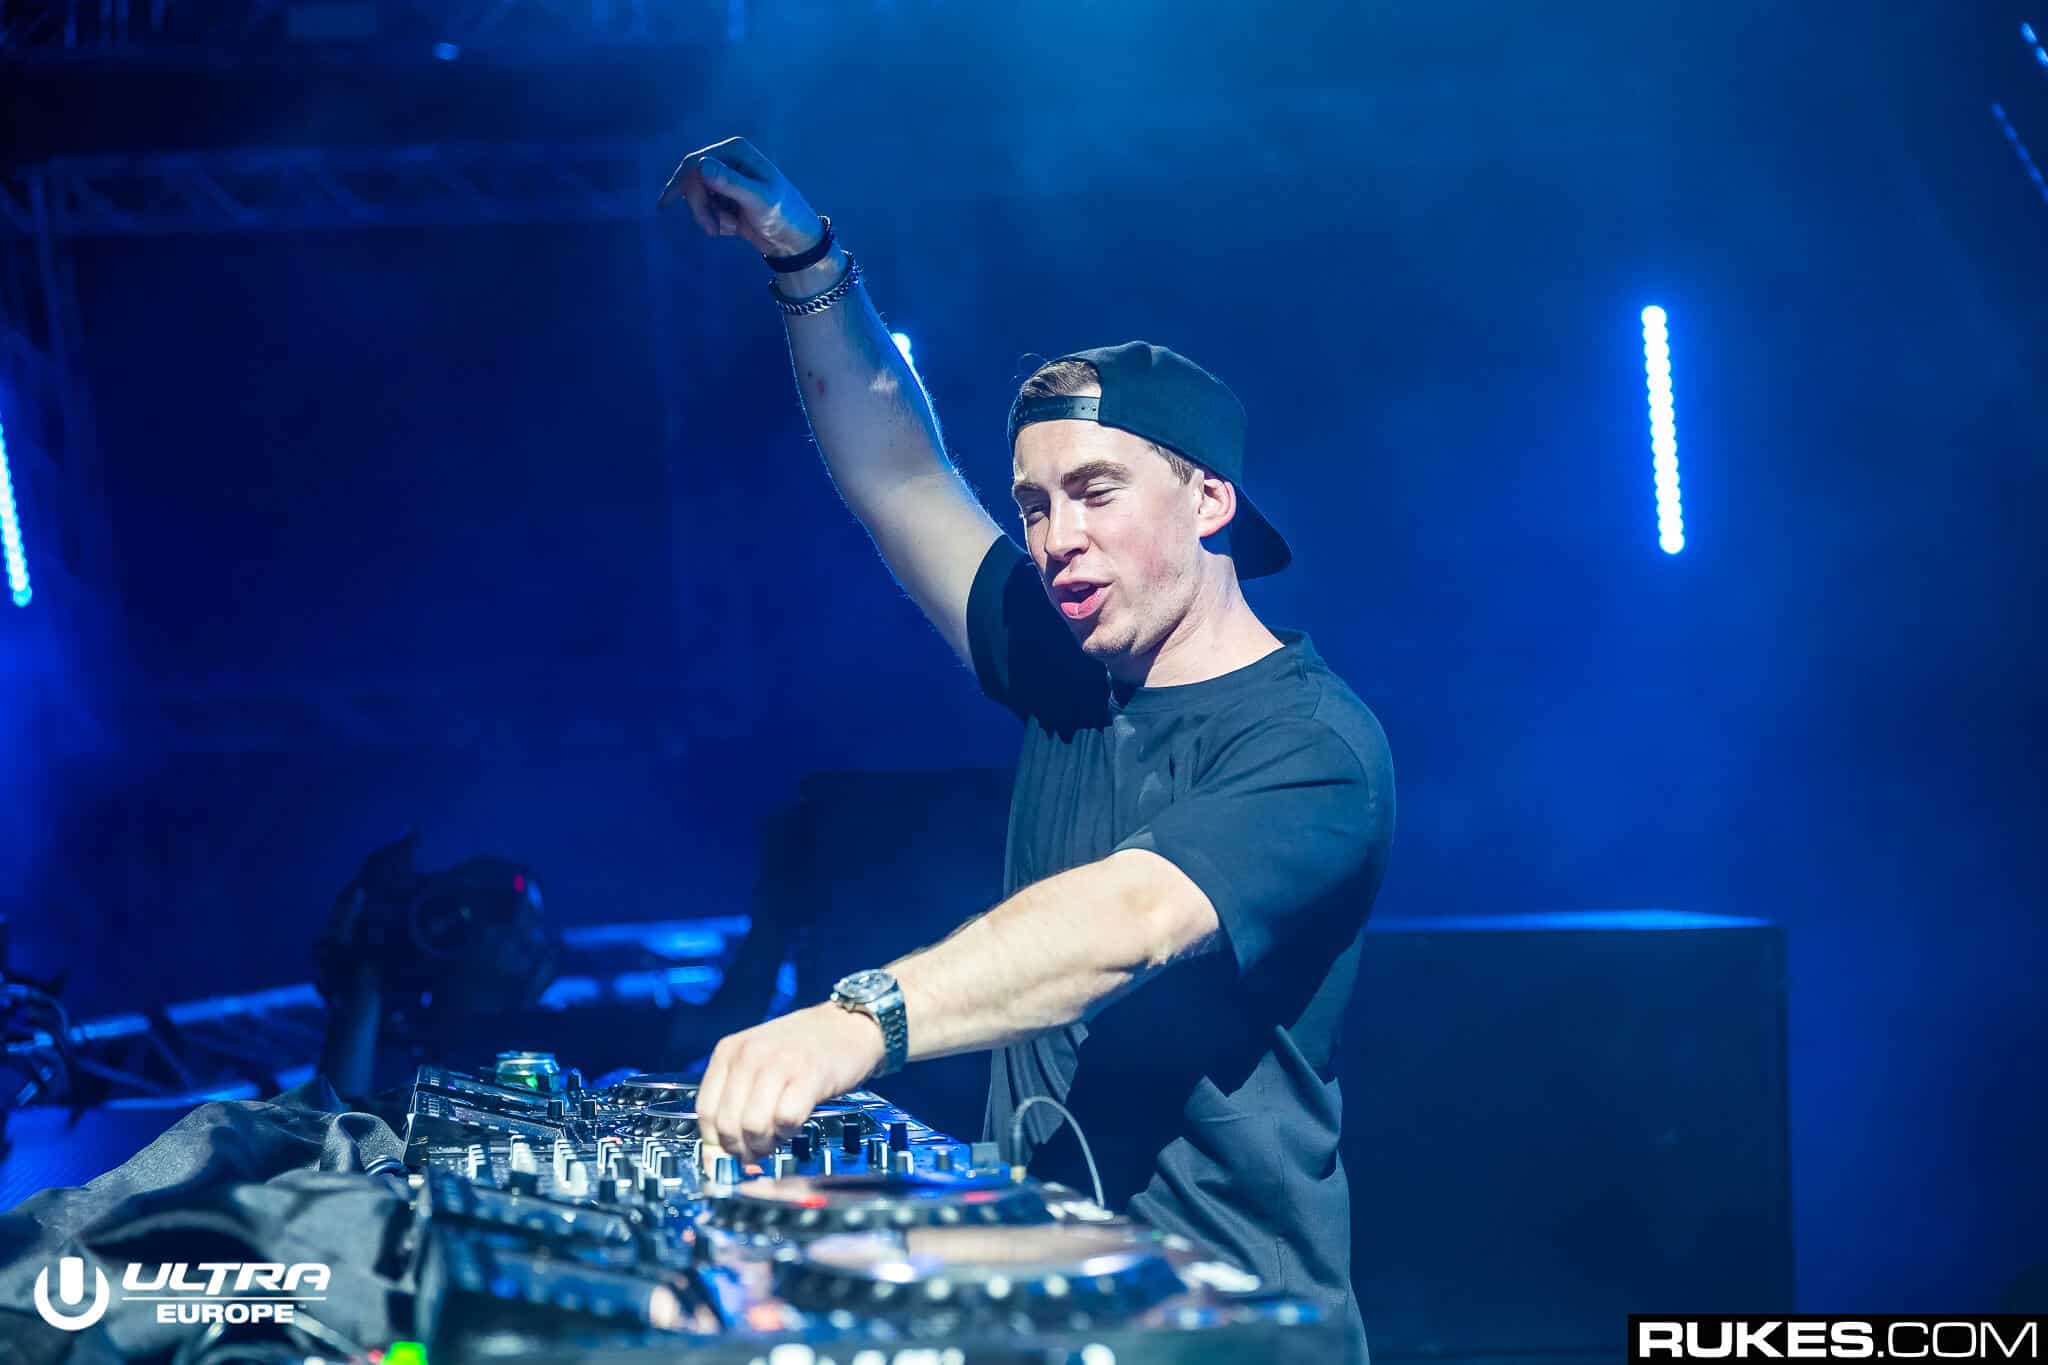 Hardwell & Dyro’s track ‘Never Say Goodbye’ turns 7 years old today